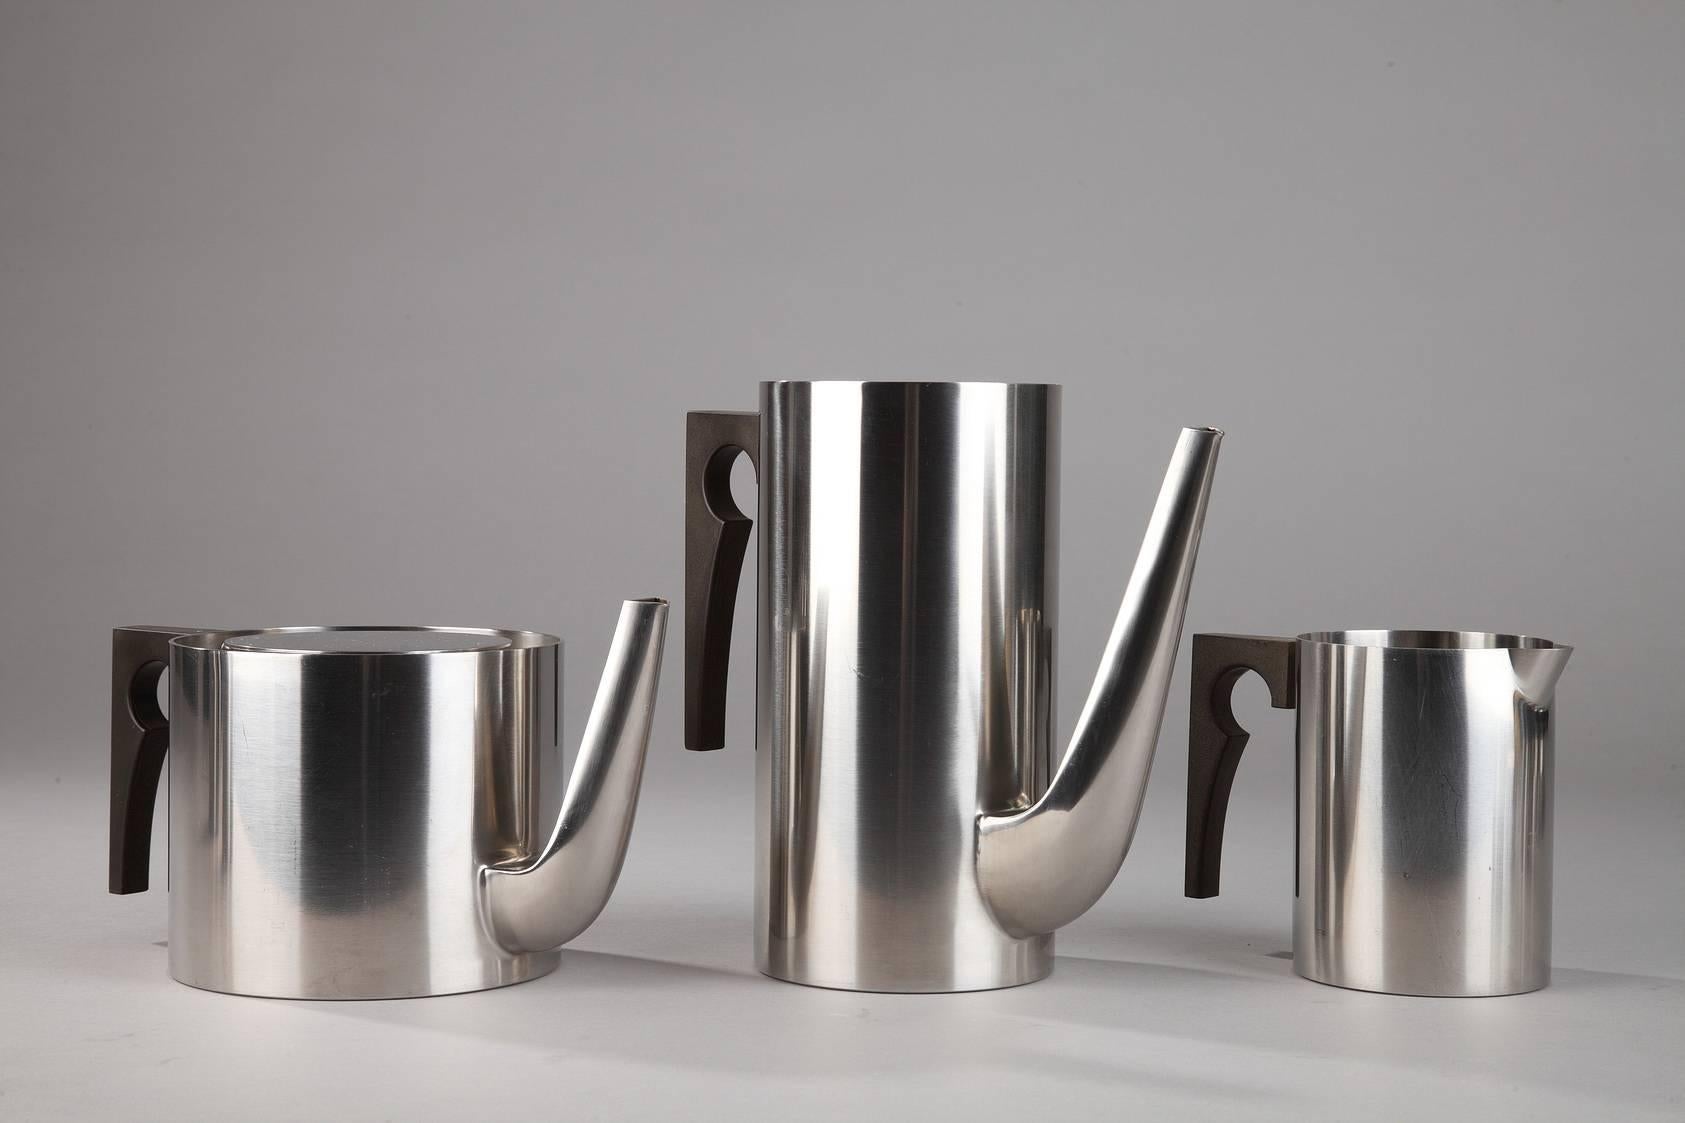 Mid-20th Century Arne Jacobsen Stainless Steel Coffee and Tea Service by Stelton